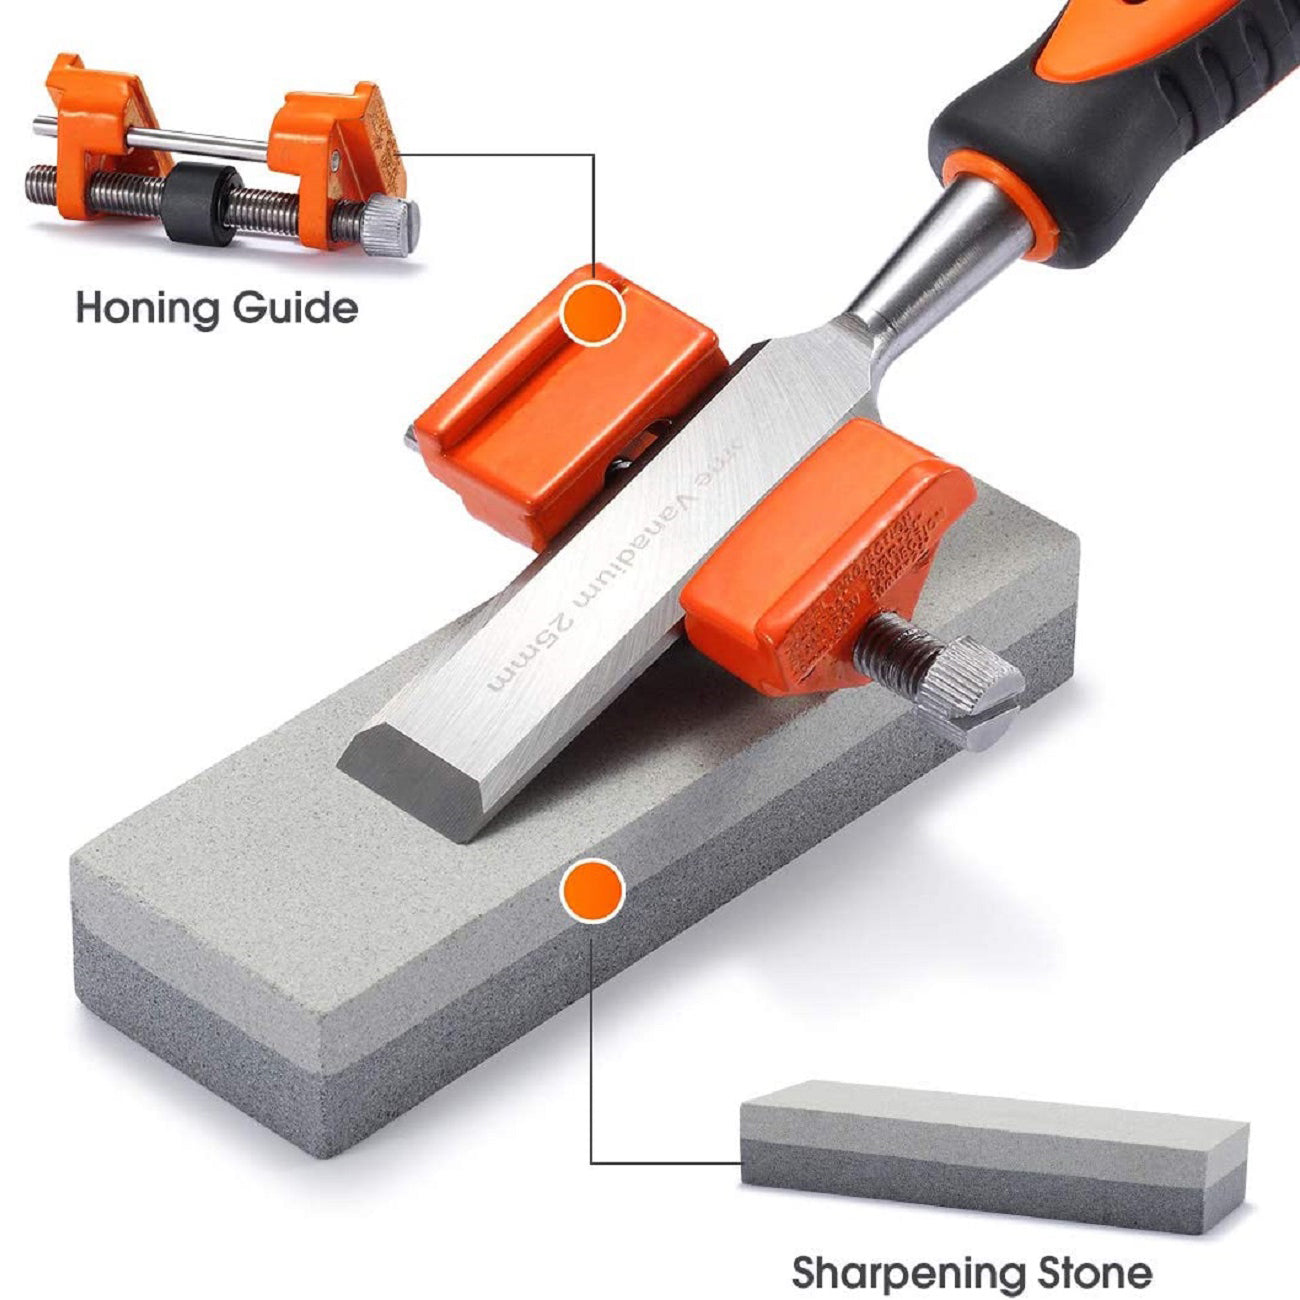 VonHaus 10 pc Premium Chisel Set for Woodworking with Honing Guide